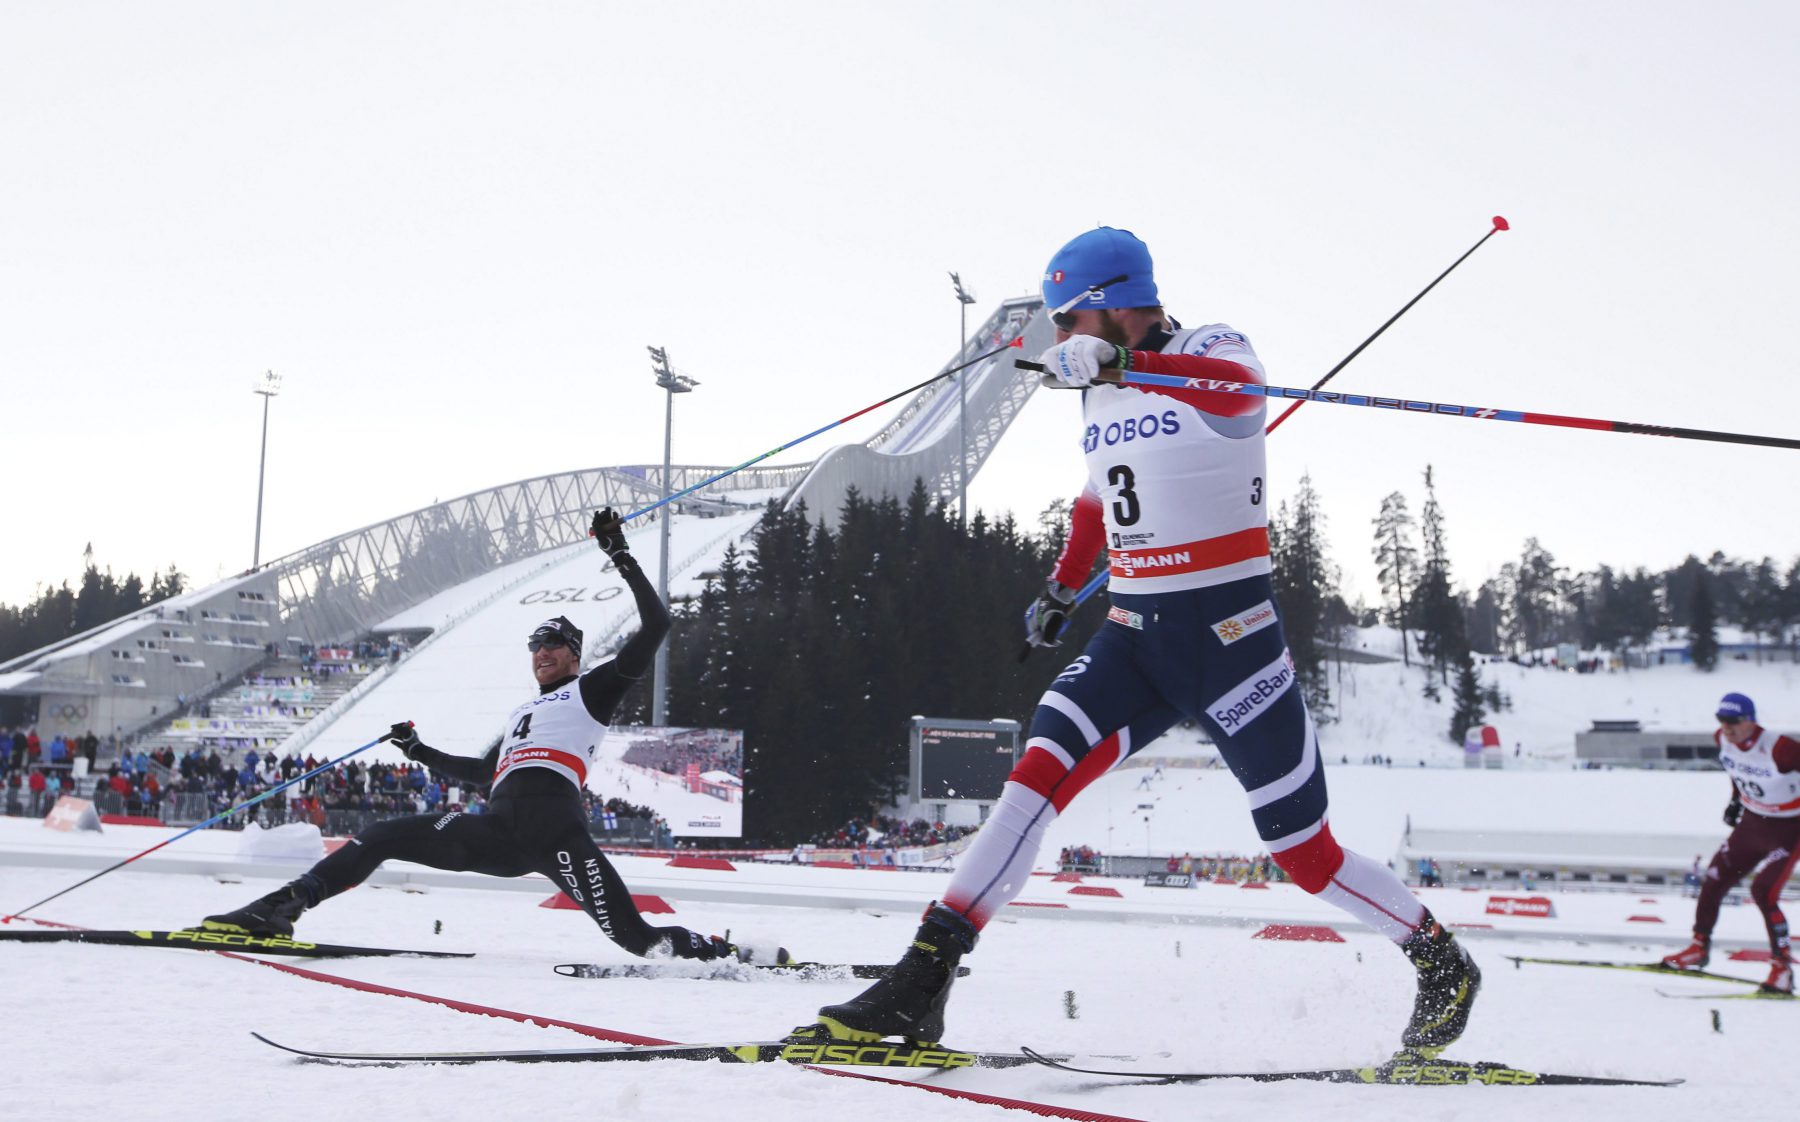 Dario Cologna of Switzerland, left, finishes first ahead of Martin Johnsrud Sundby of Norway, second, in the FIS World Cup Cross Country Men's 50 km Mass Start in Holmenkollen, Norway Saturday, March 10, 2018. (Berit Roald/NTB scanpix via AP)